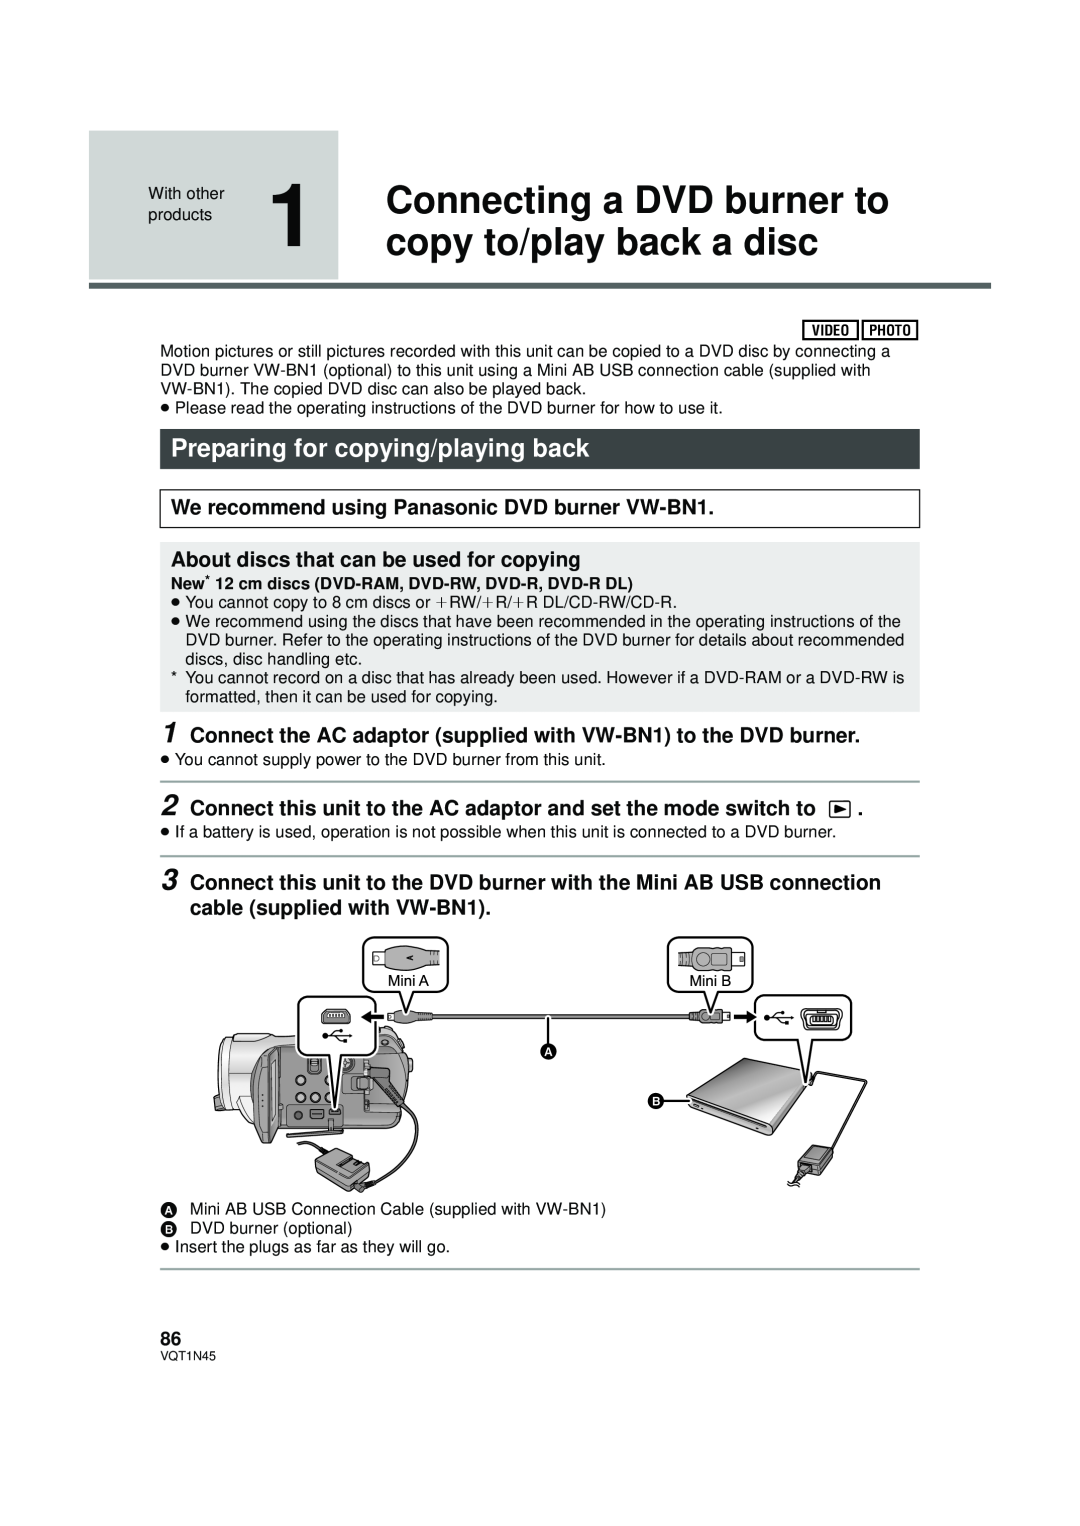 Panasonic HDC-SD9PC manual Connecting a DVD burner to, copy to/play back a disc, Preparing for copying/playing back 